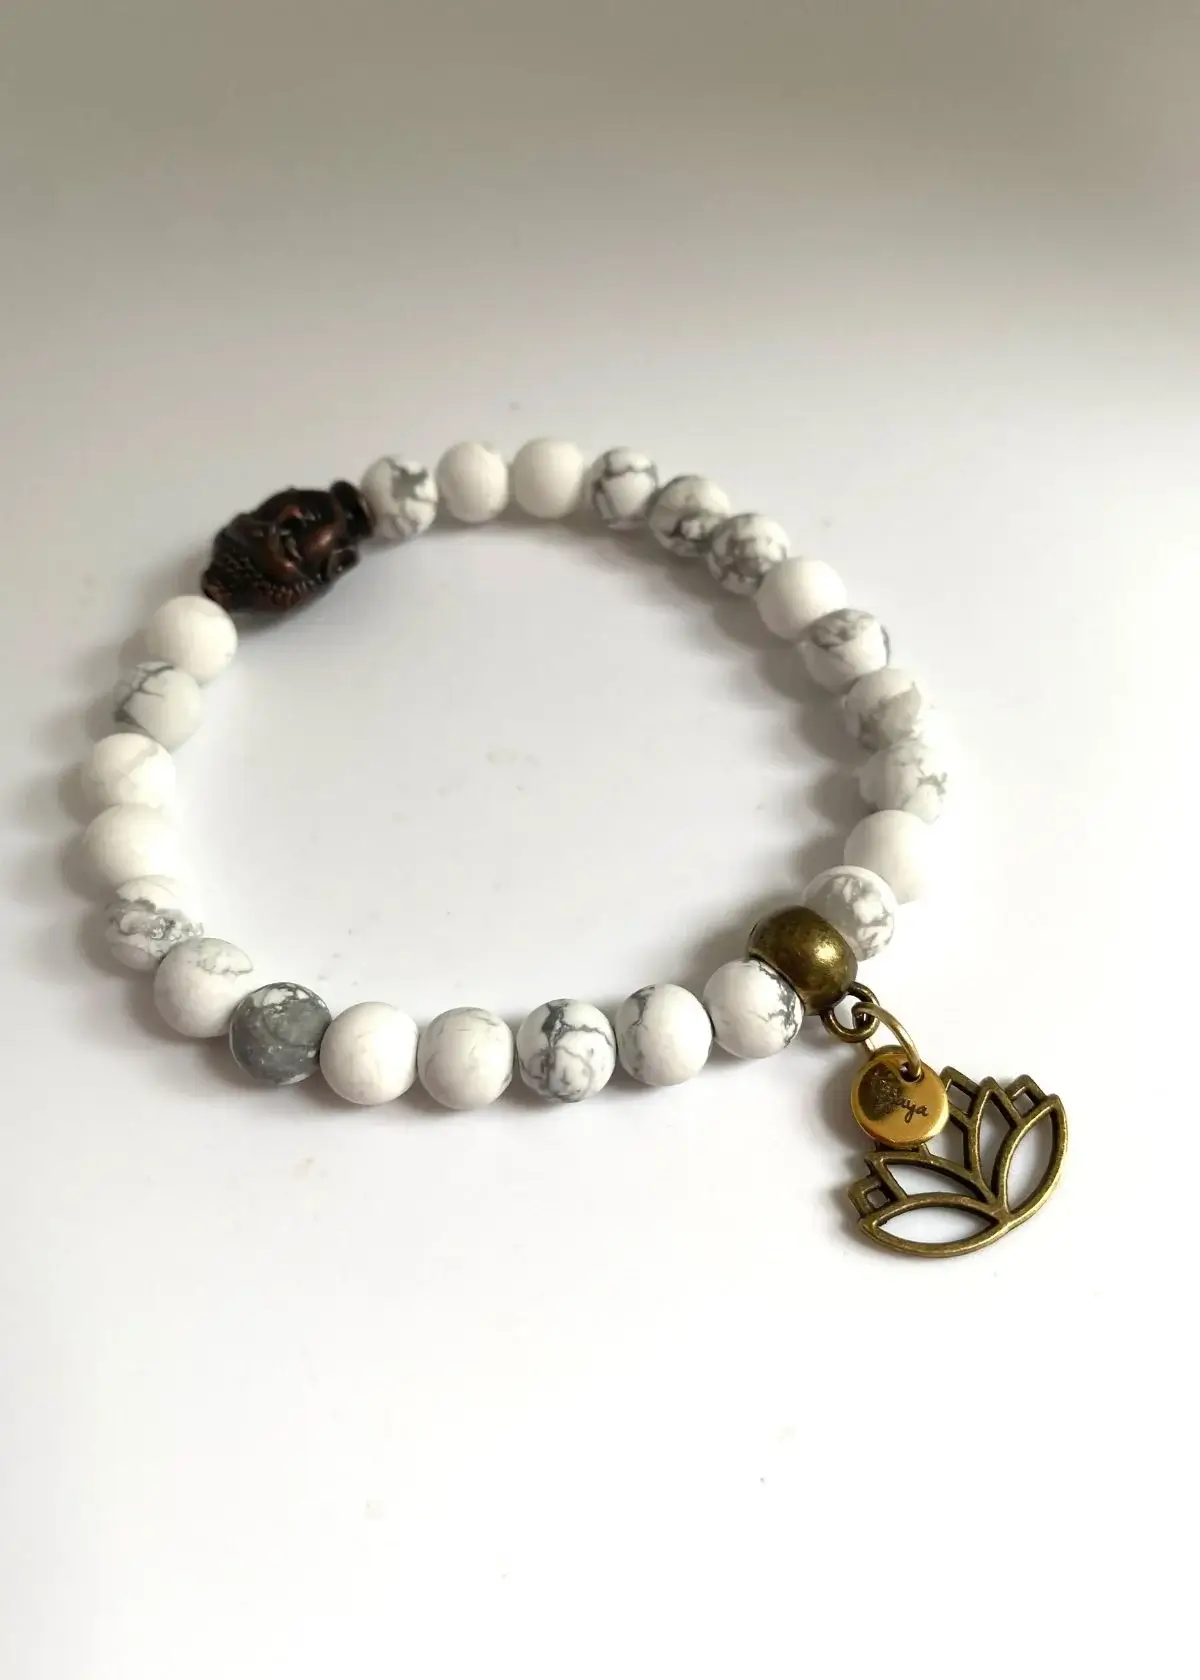 How to choose the right howlite bracelet?